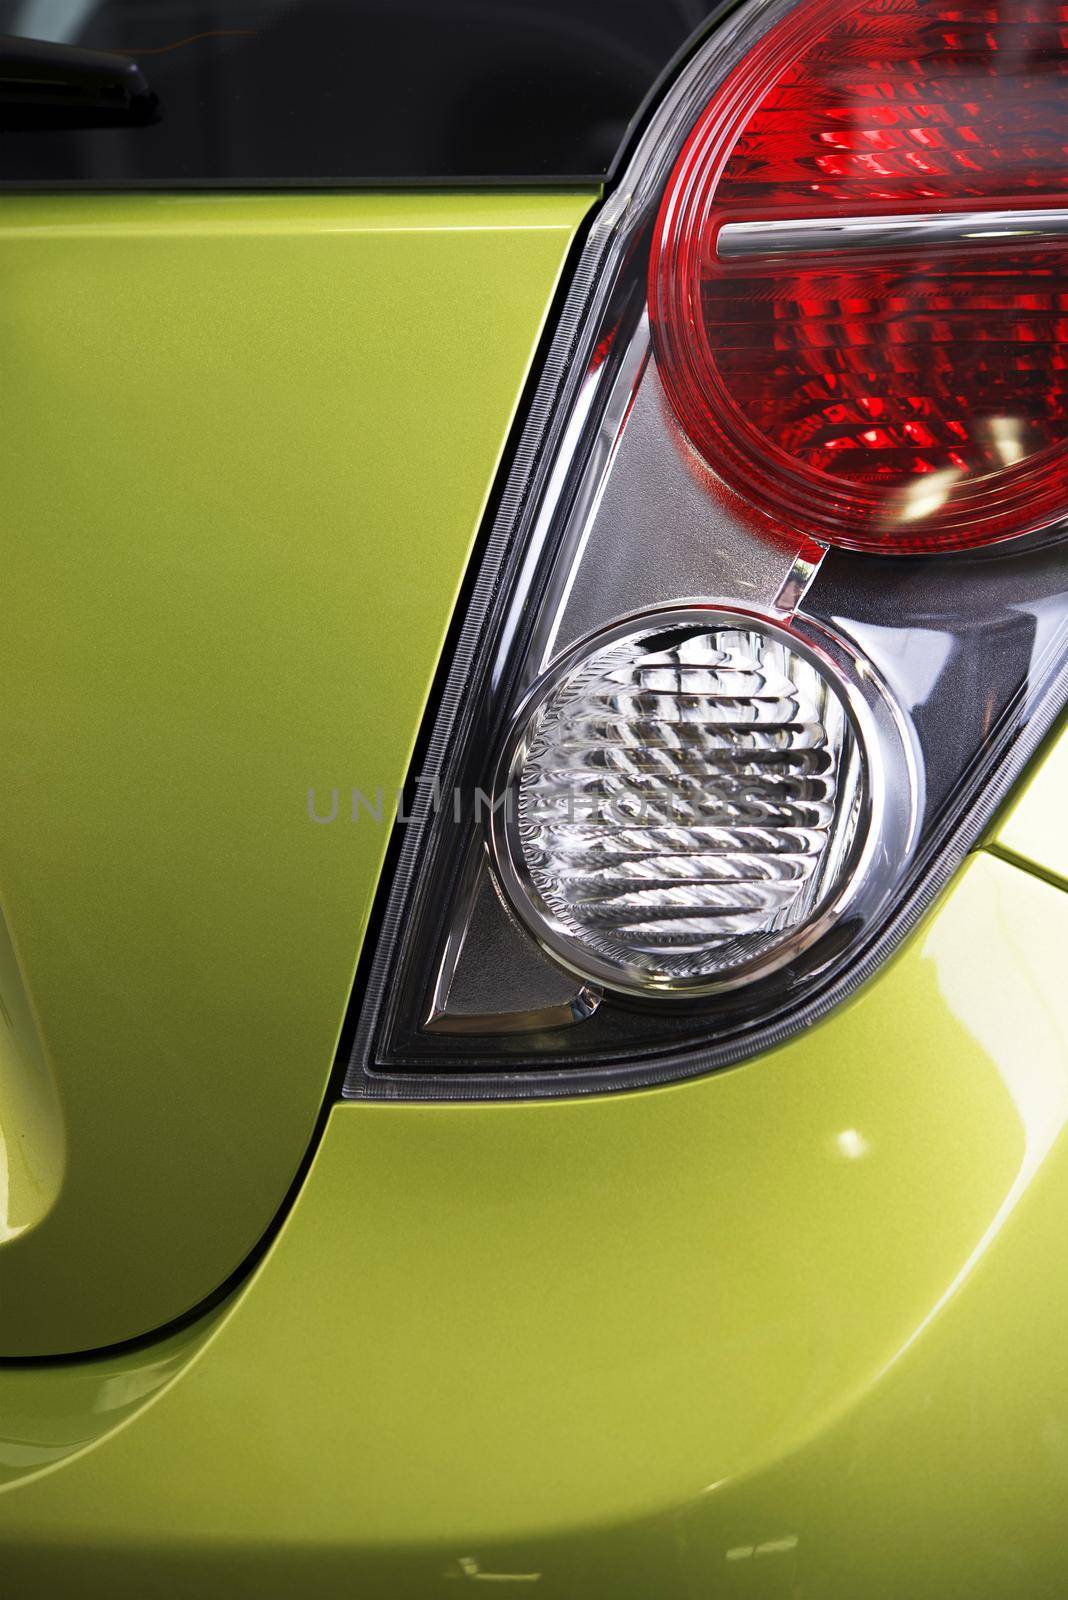 Rear Vehicle Lights. Reverse and Stop Lights Closeup. Green Vehicle Body. Transportation Photo Collection. by welcomia